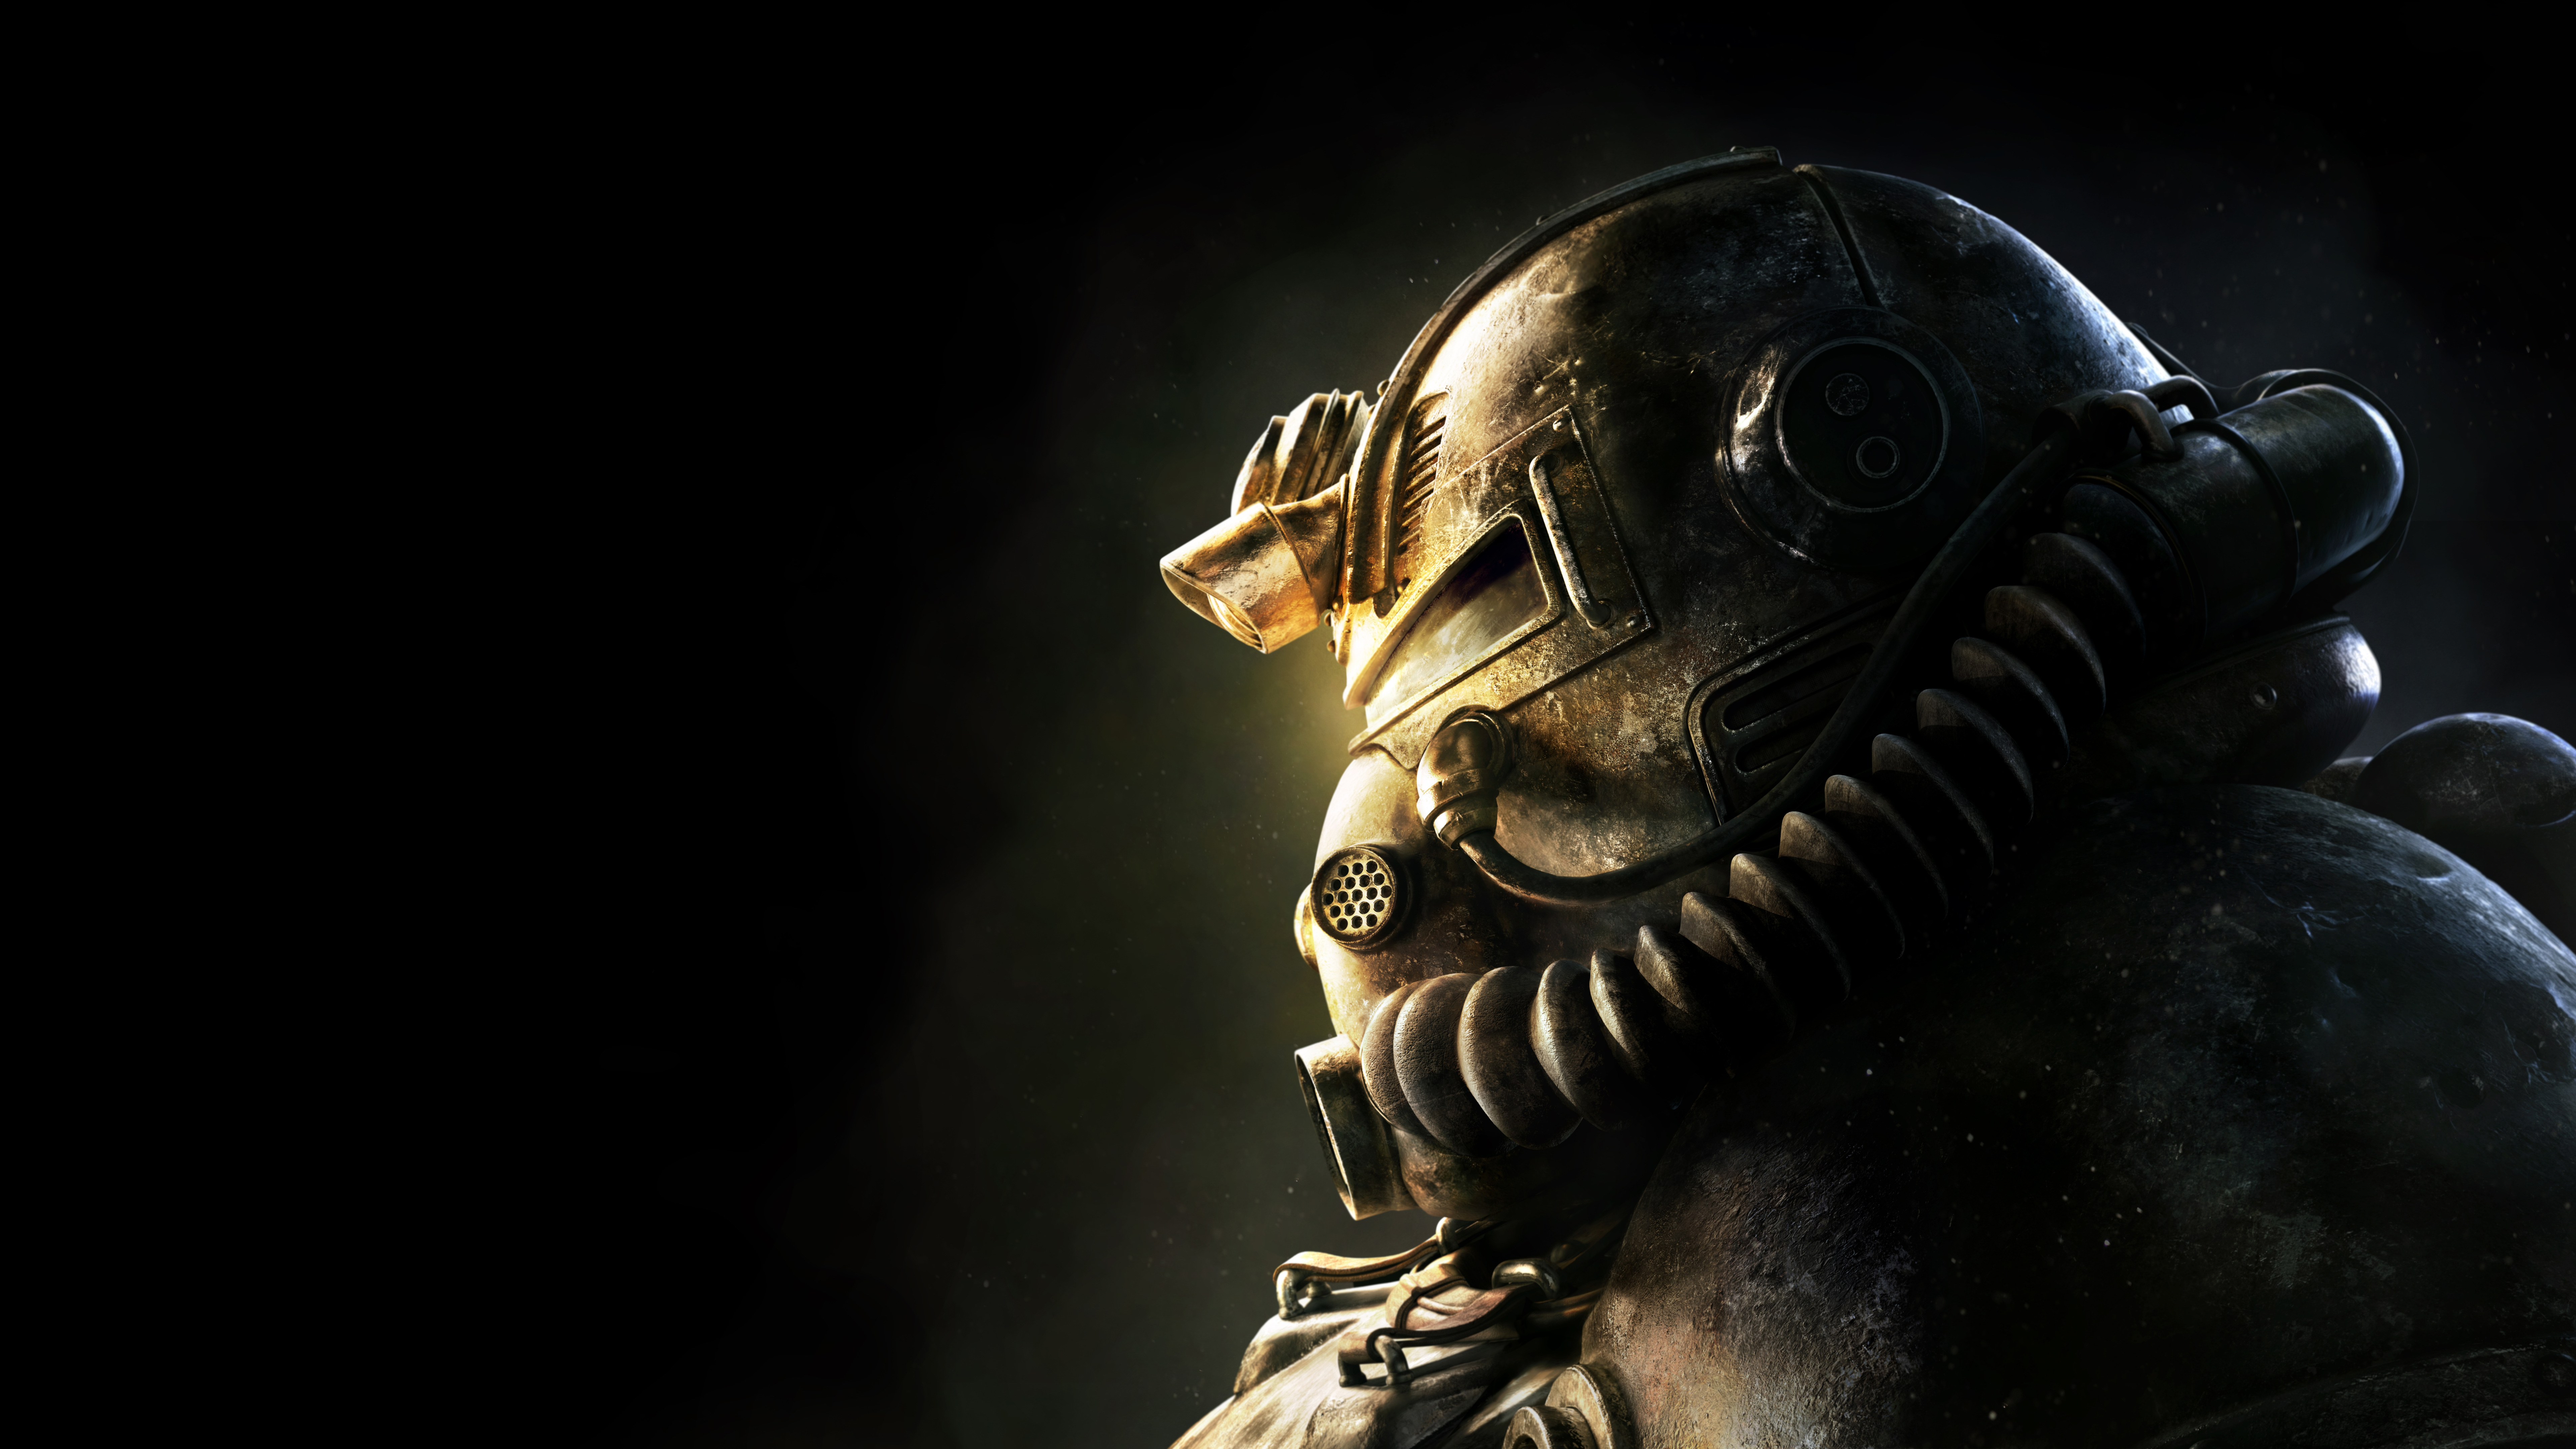 7680x4320 Fallout 76 12k 8k HD 4k Wallpapers Images Backgrounds